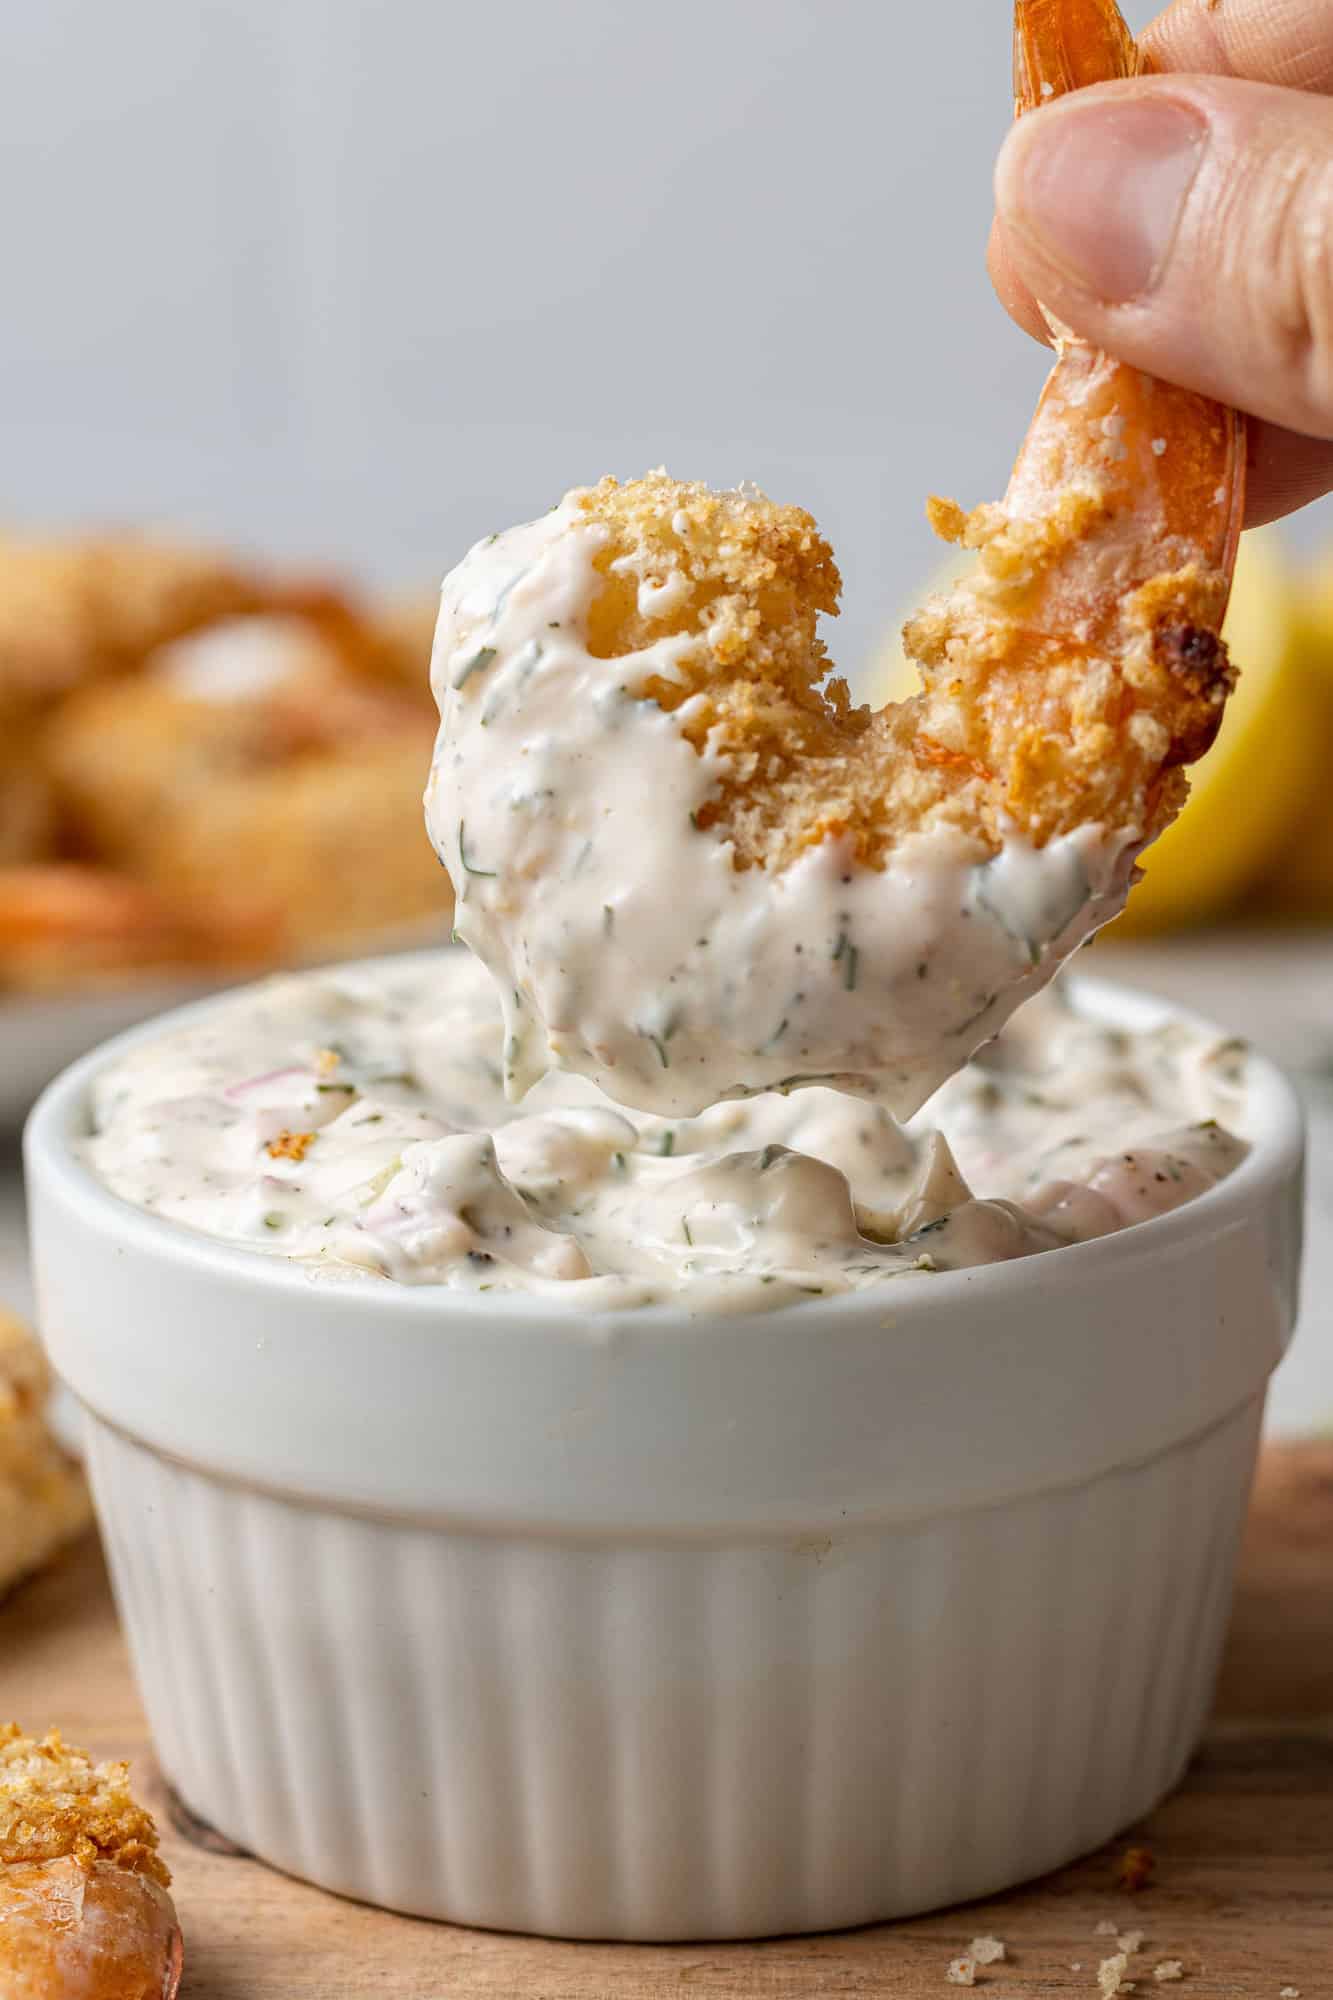 Breaded shrimp being held in a hand and dipped in tartar sauce.